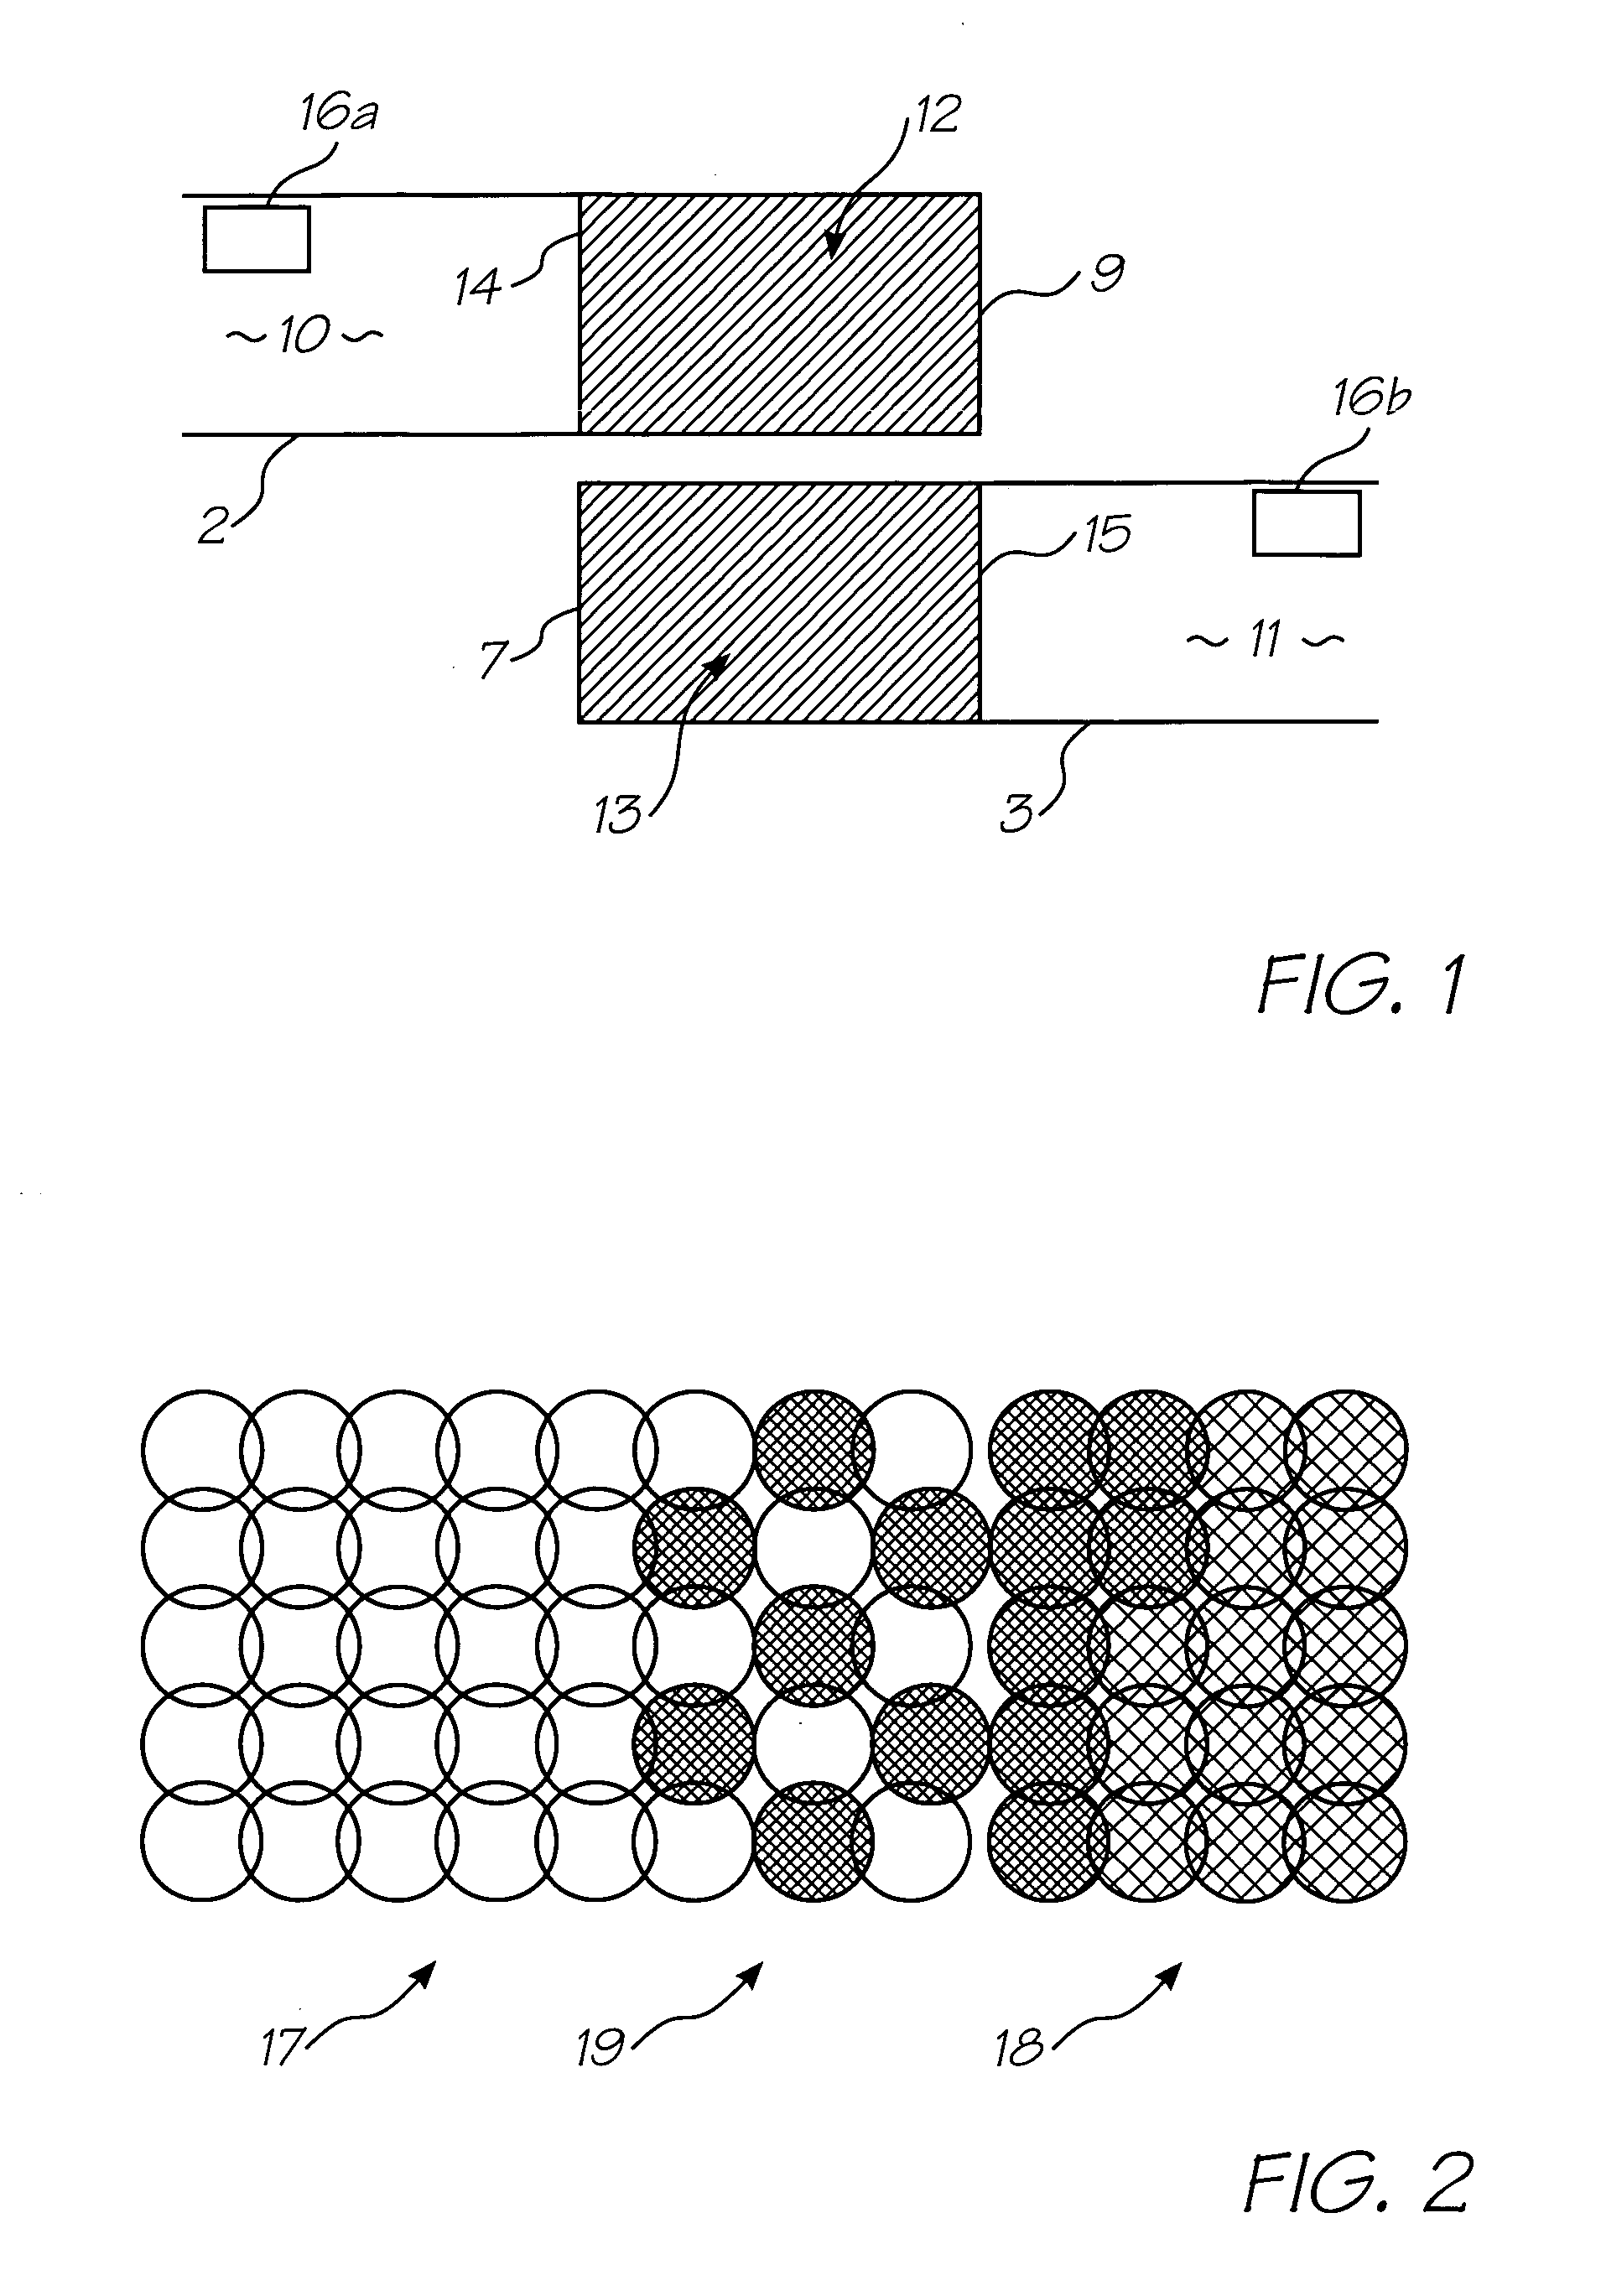 Method and apparatus for compensation for time varying nozzle misalignment in a drop on demand printhead